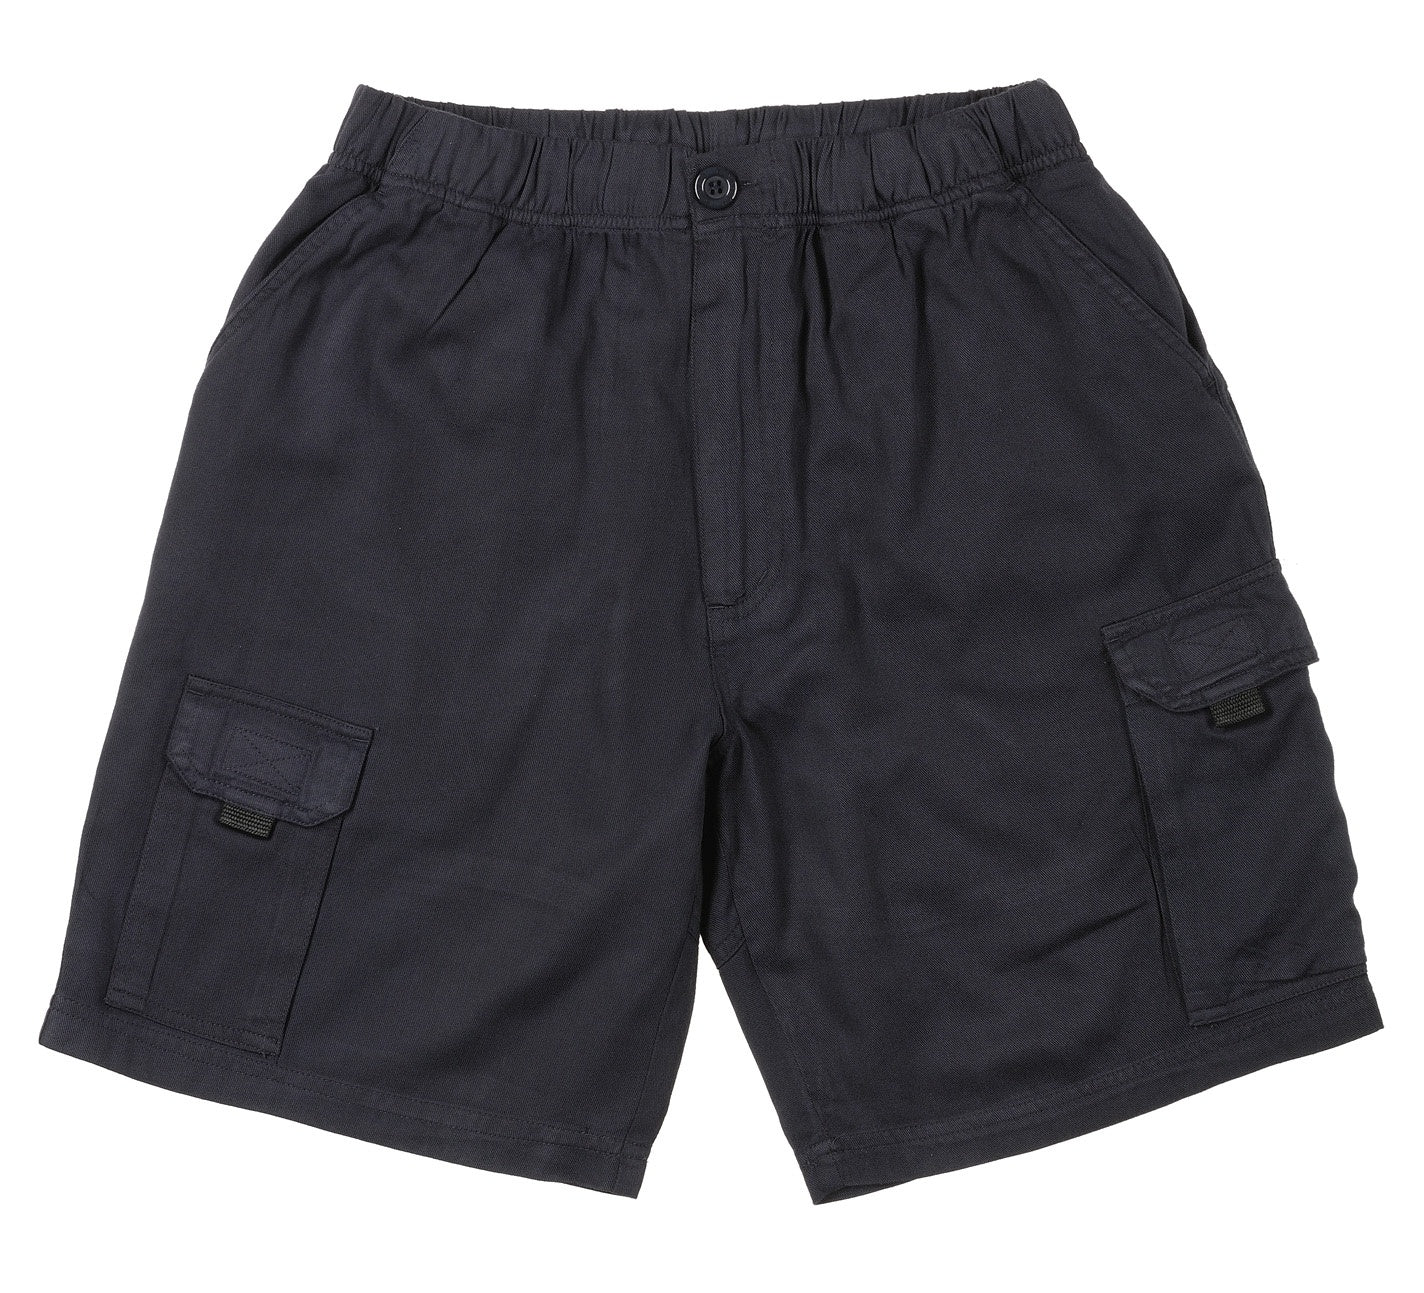 Bamboo Relax Short - The Rugby Shop Darwin